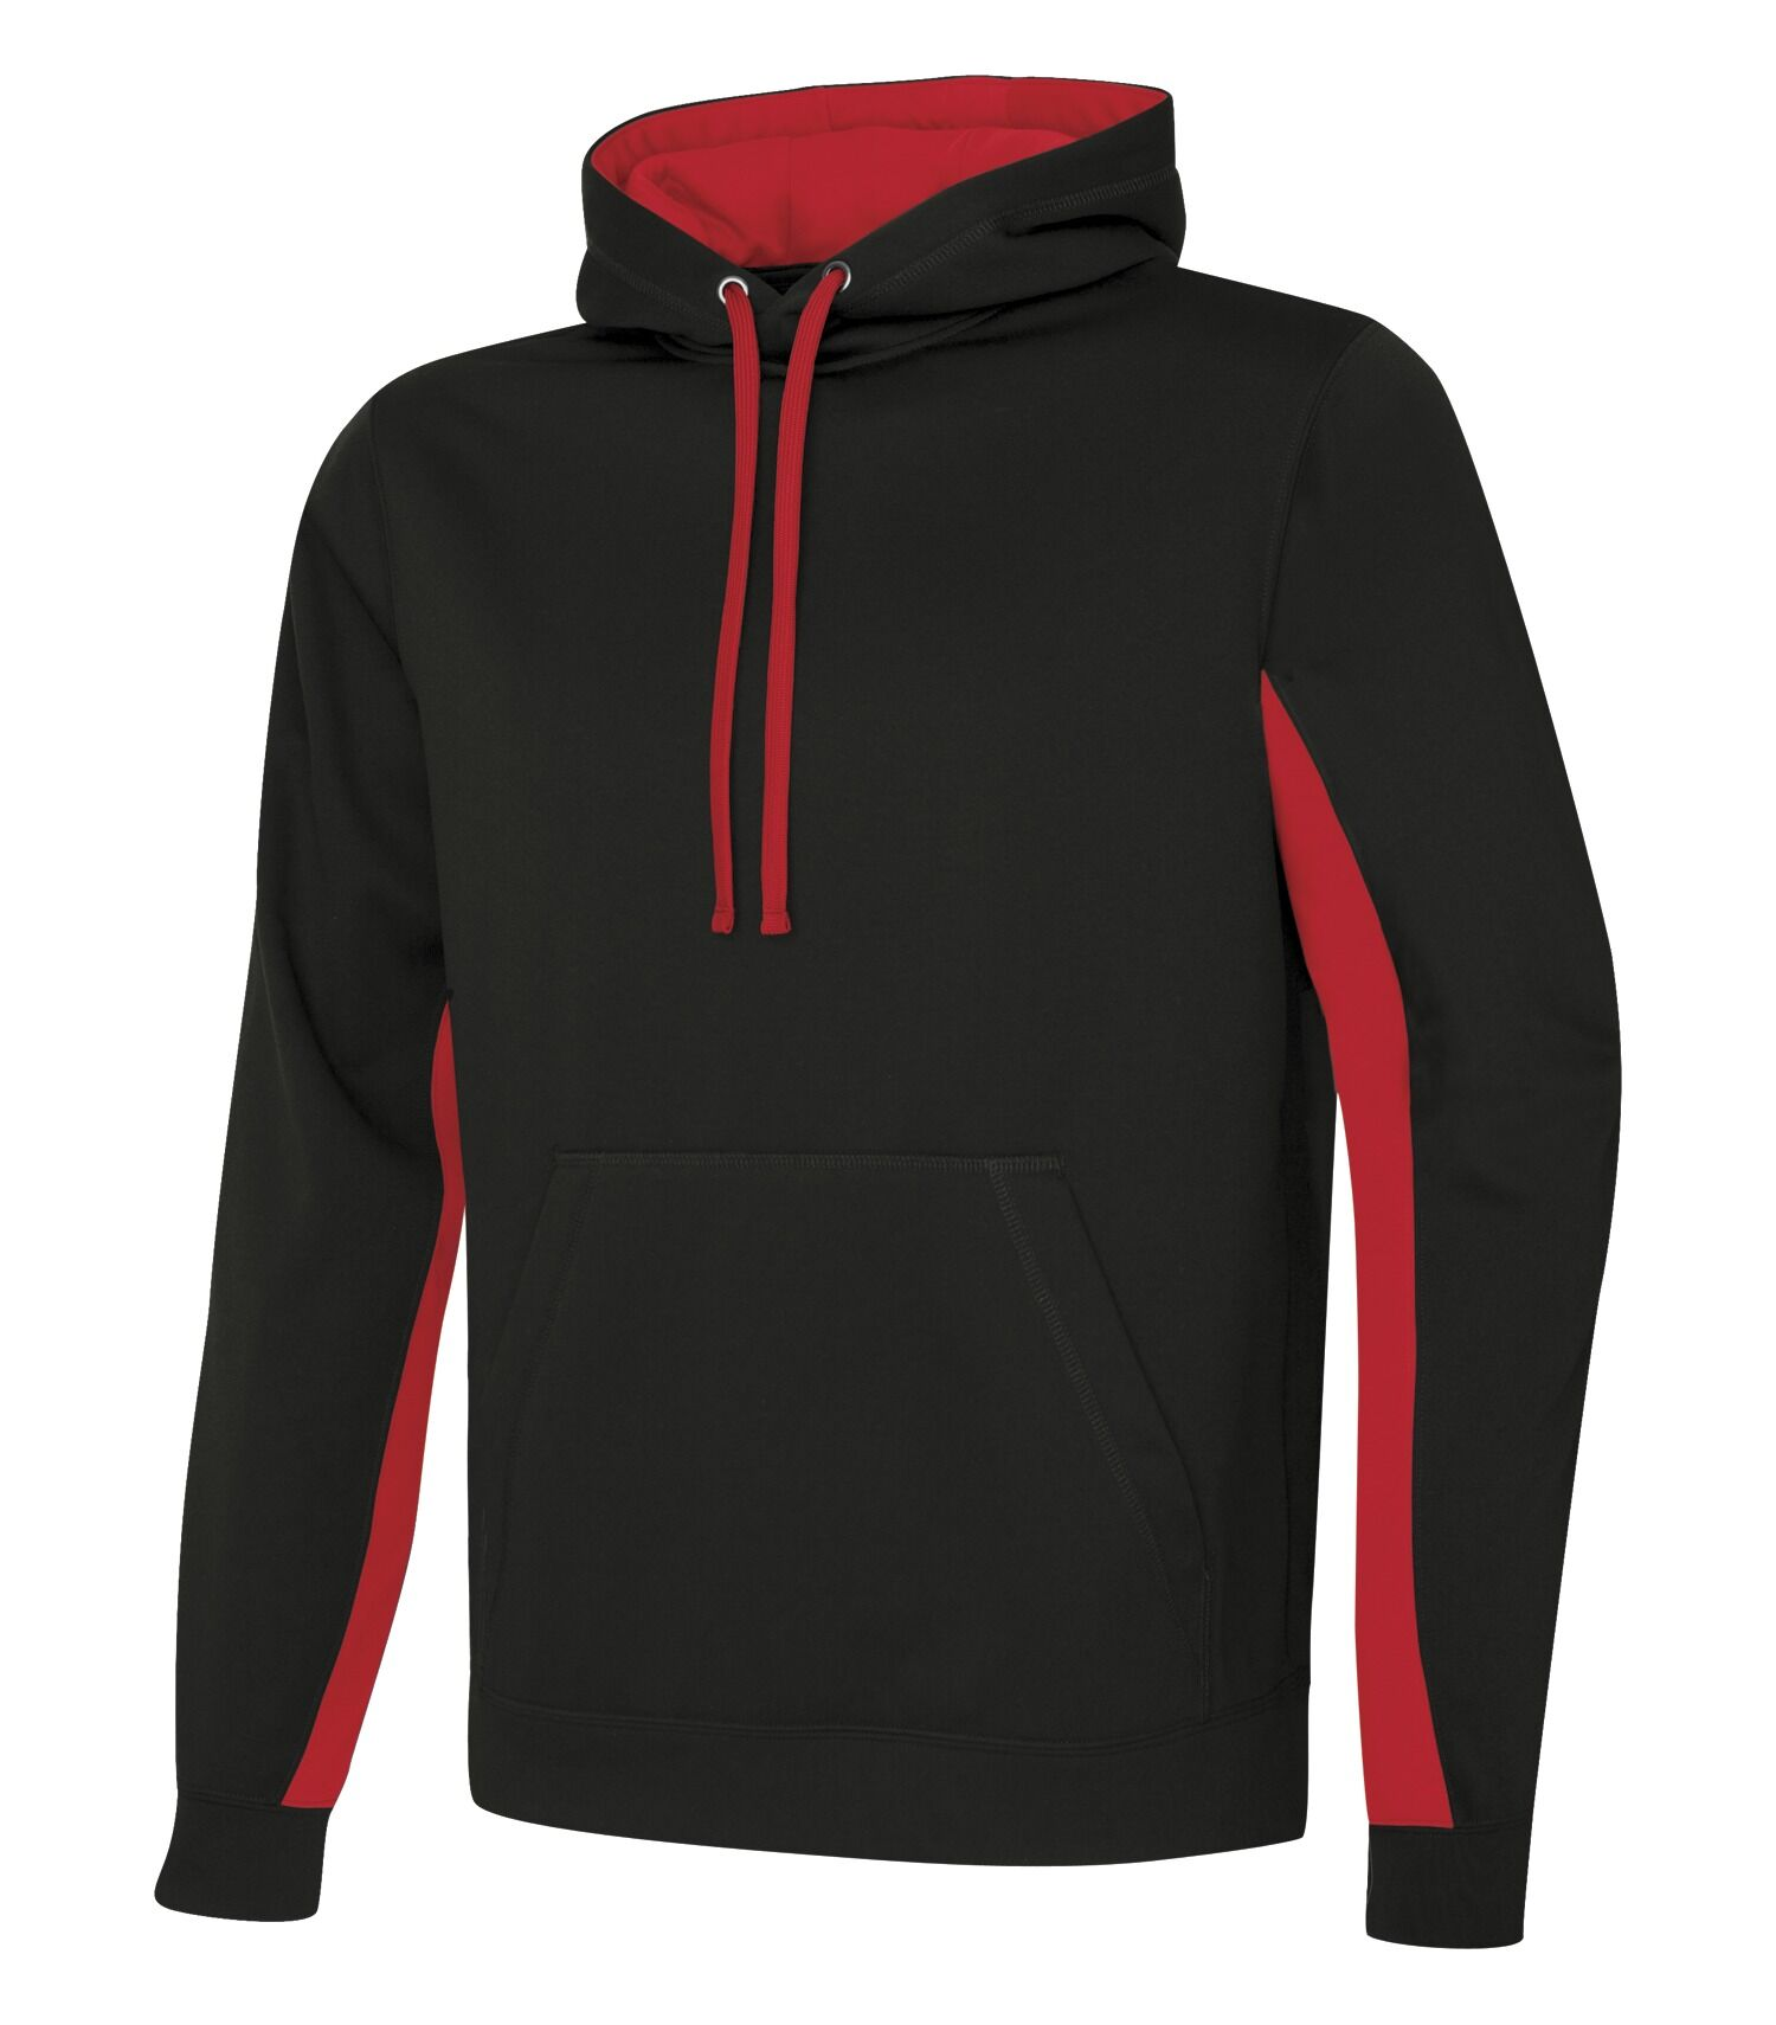 Adult Hoodie - Polyester - ATC F2011